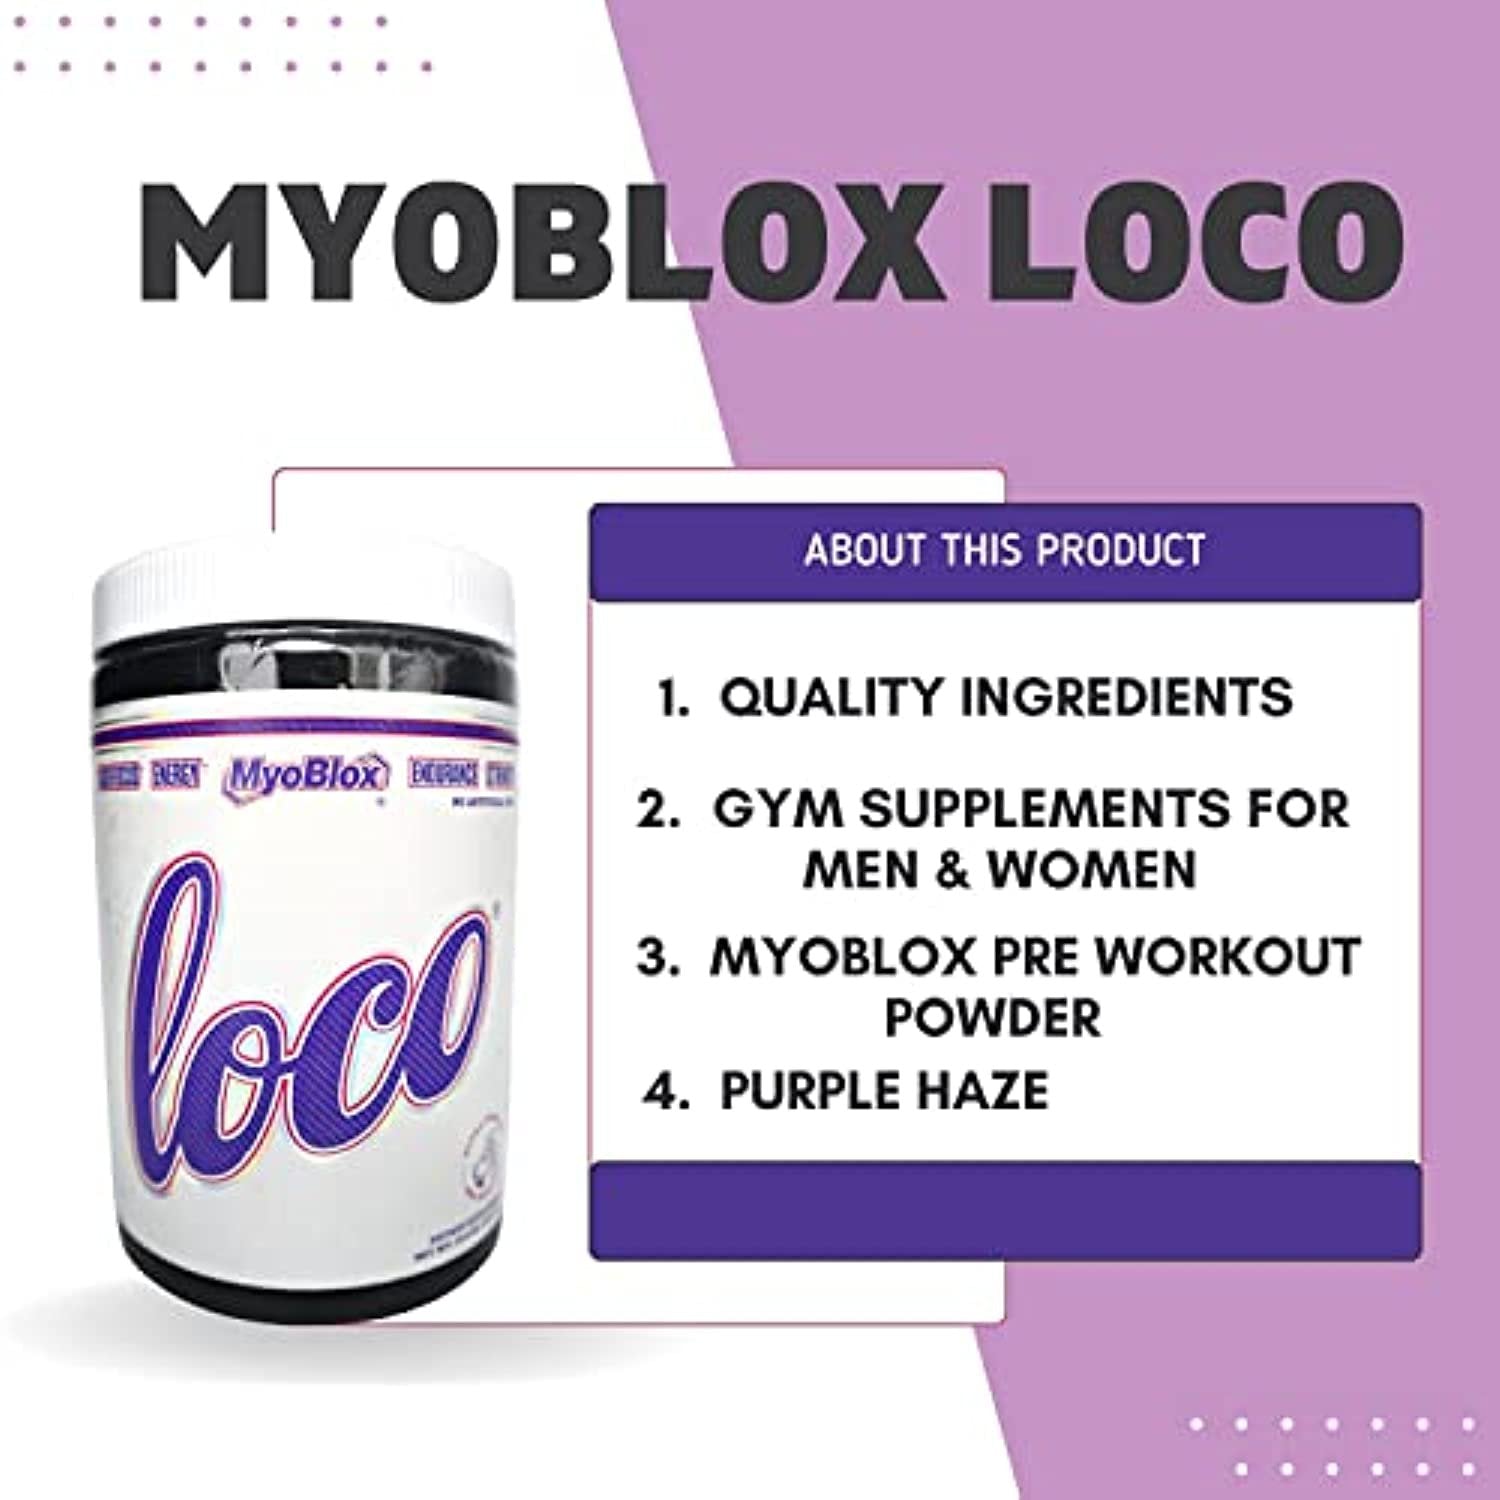 MyoBlox LOCO Pre-Workout Nitric Oxide Booster | Supports Muscle Pumps & Enhanced Vascularity | for Energy, Focus & Intensity | 400mg of Natural Caffeine per Scoop (Purple Haze) with Bonus Key Chain